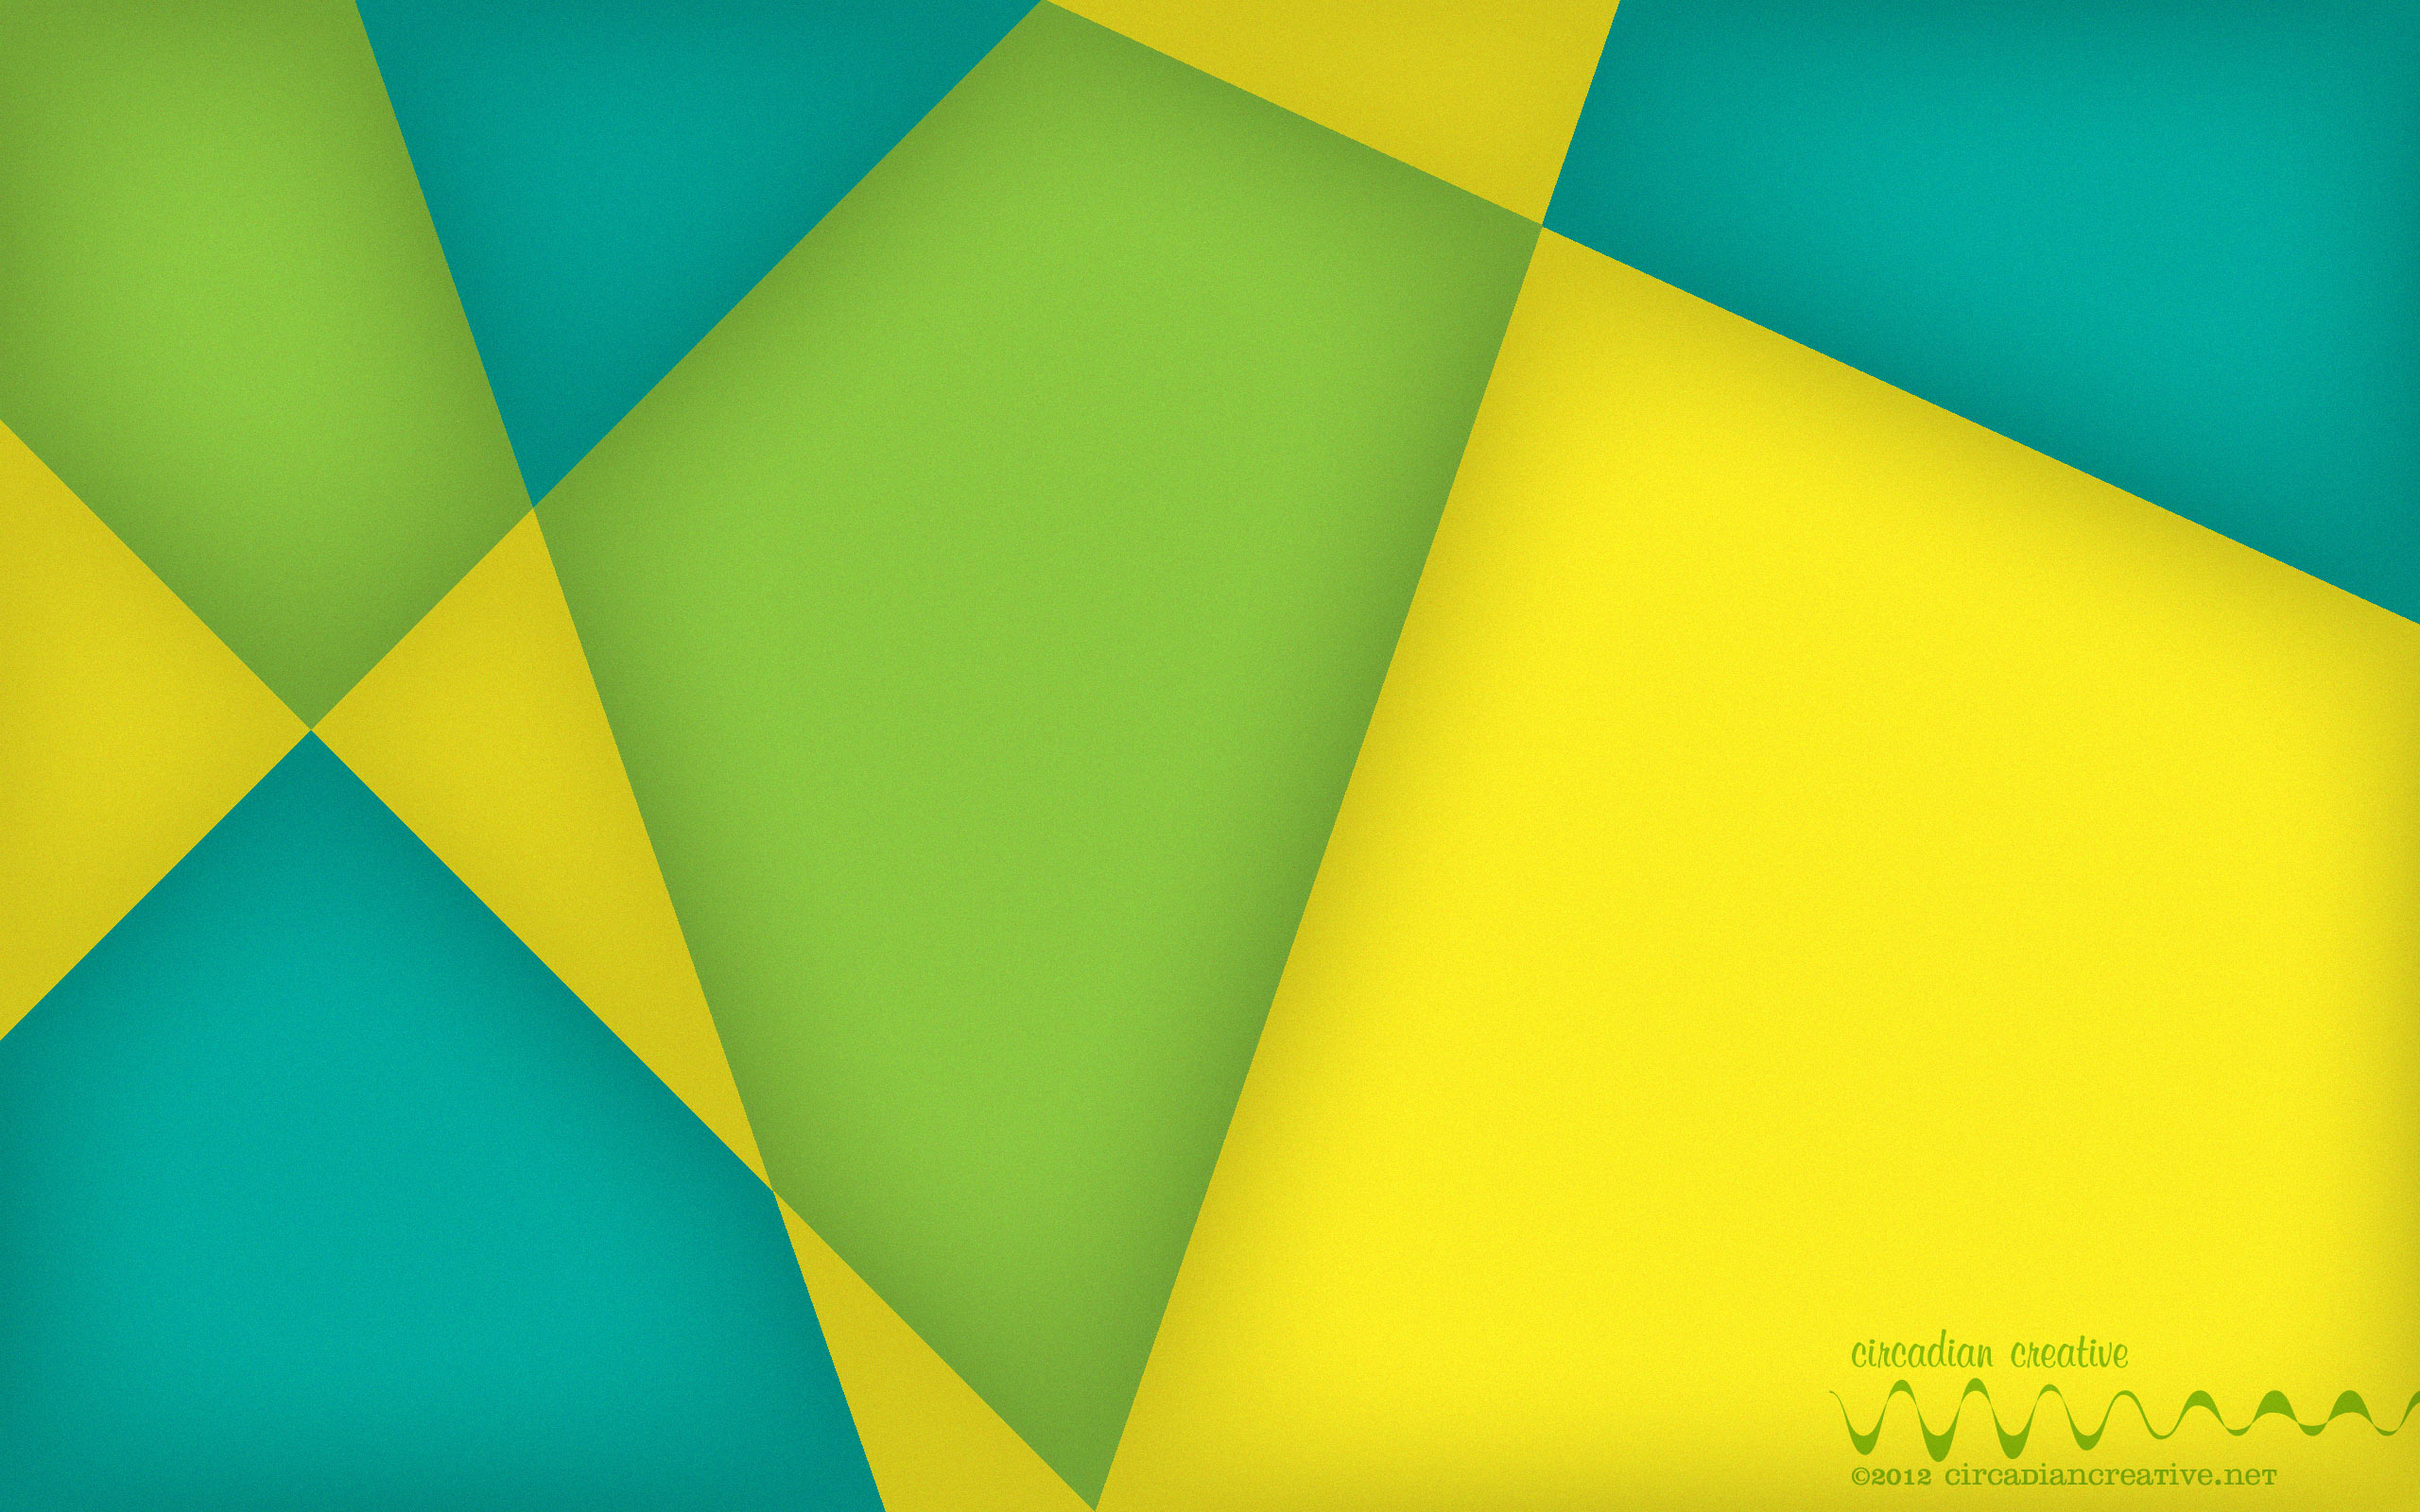 latest wallpaper designs,green,yellow,blue,line,turquoise